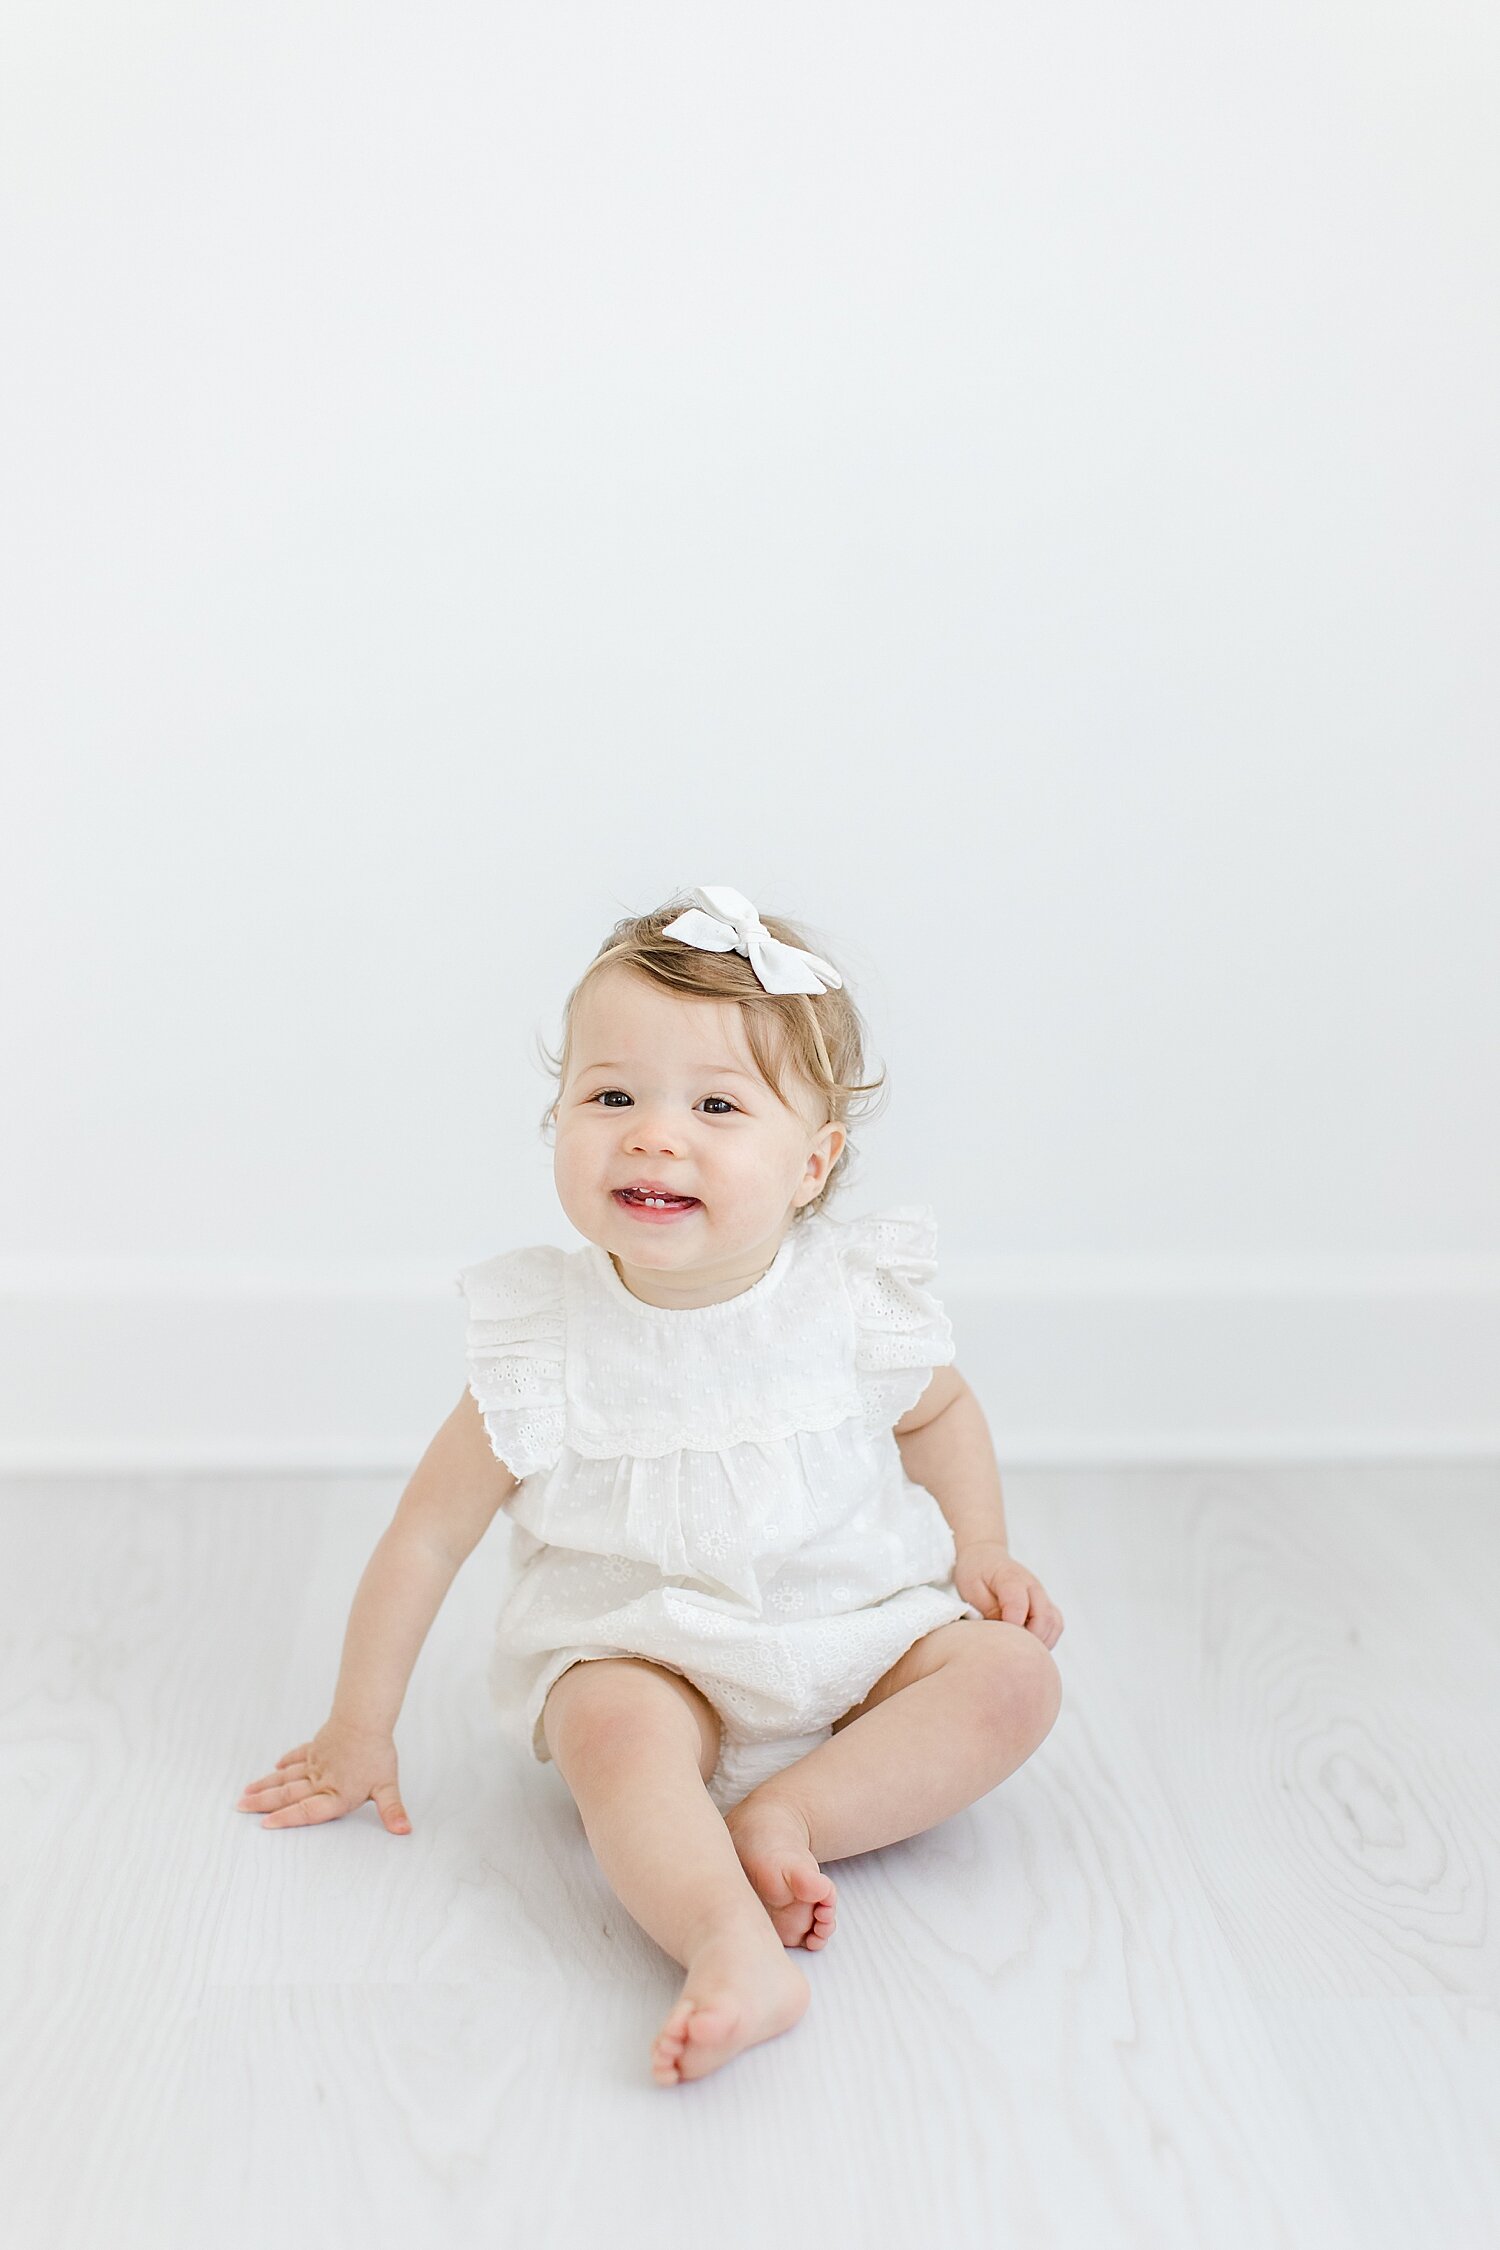 Classic one-year-old photos and cake smash session in Westport Studio. Photo by Kristin Wood Photography.